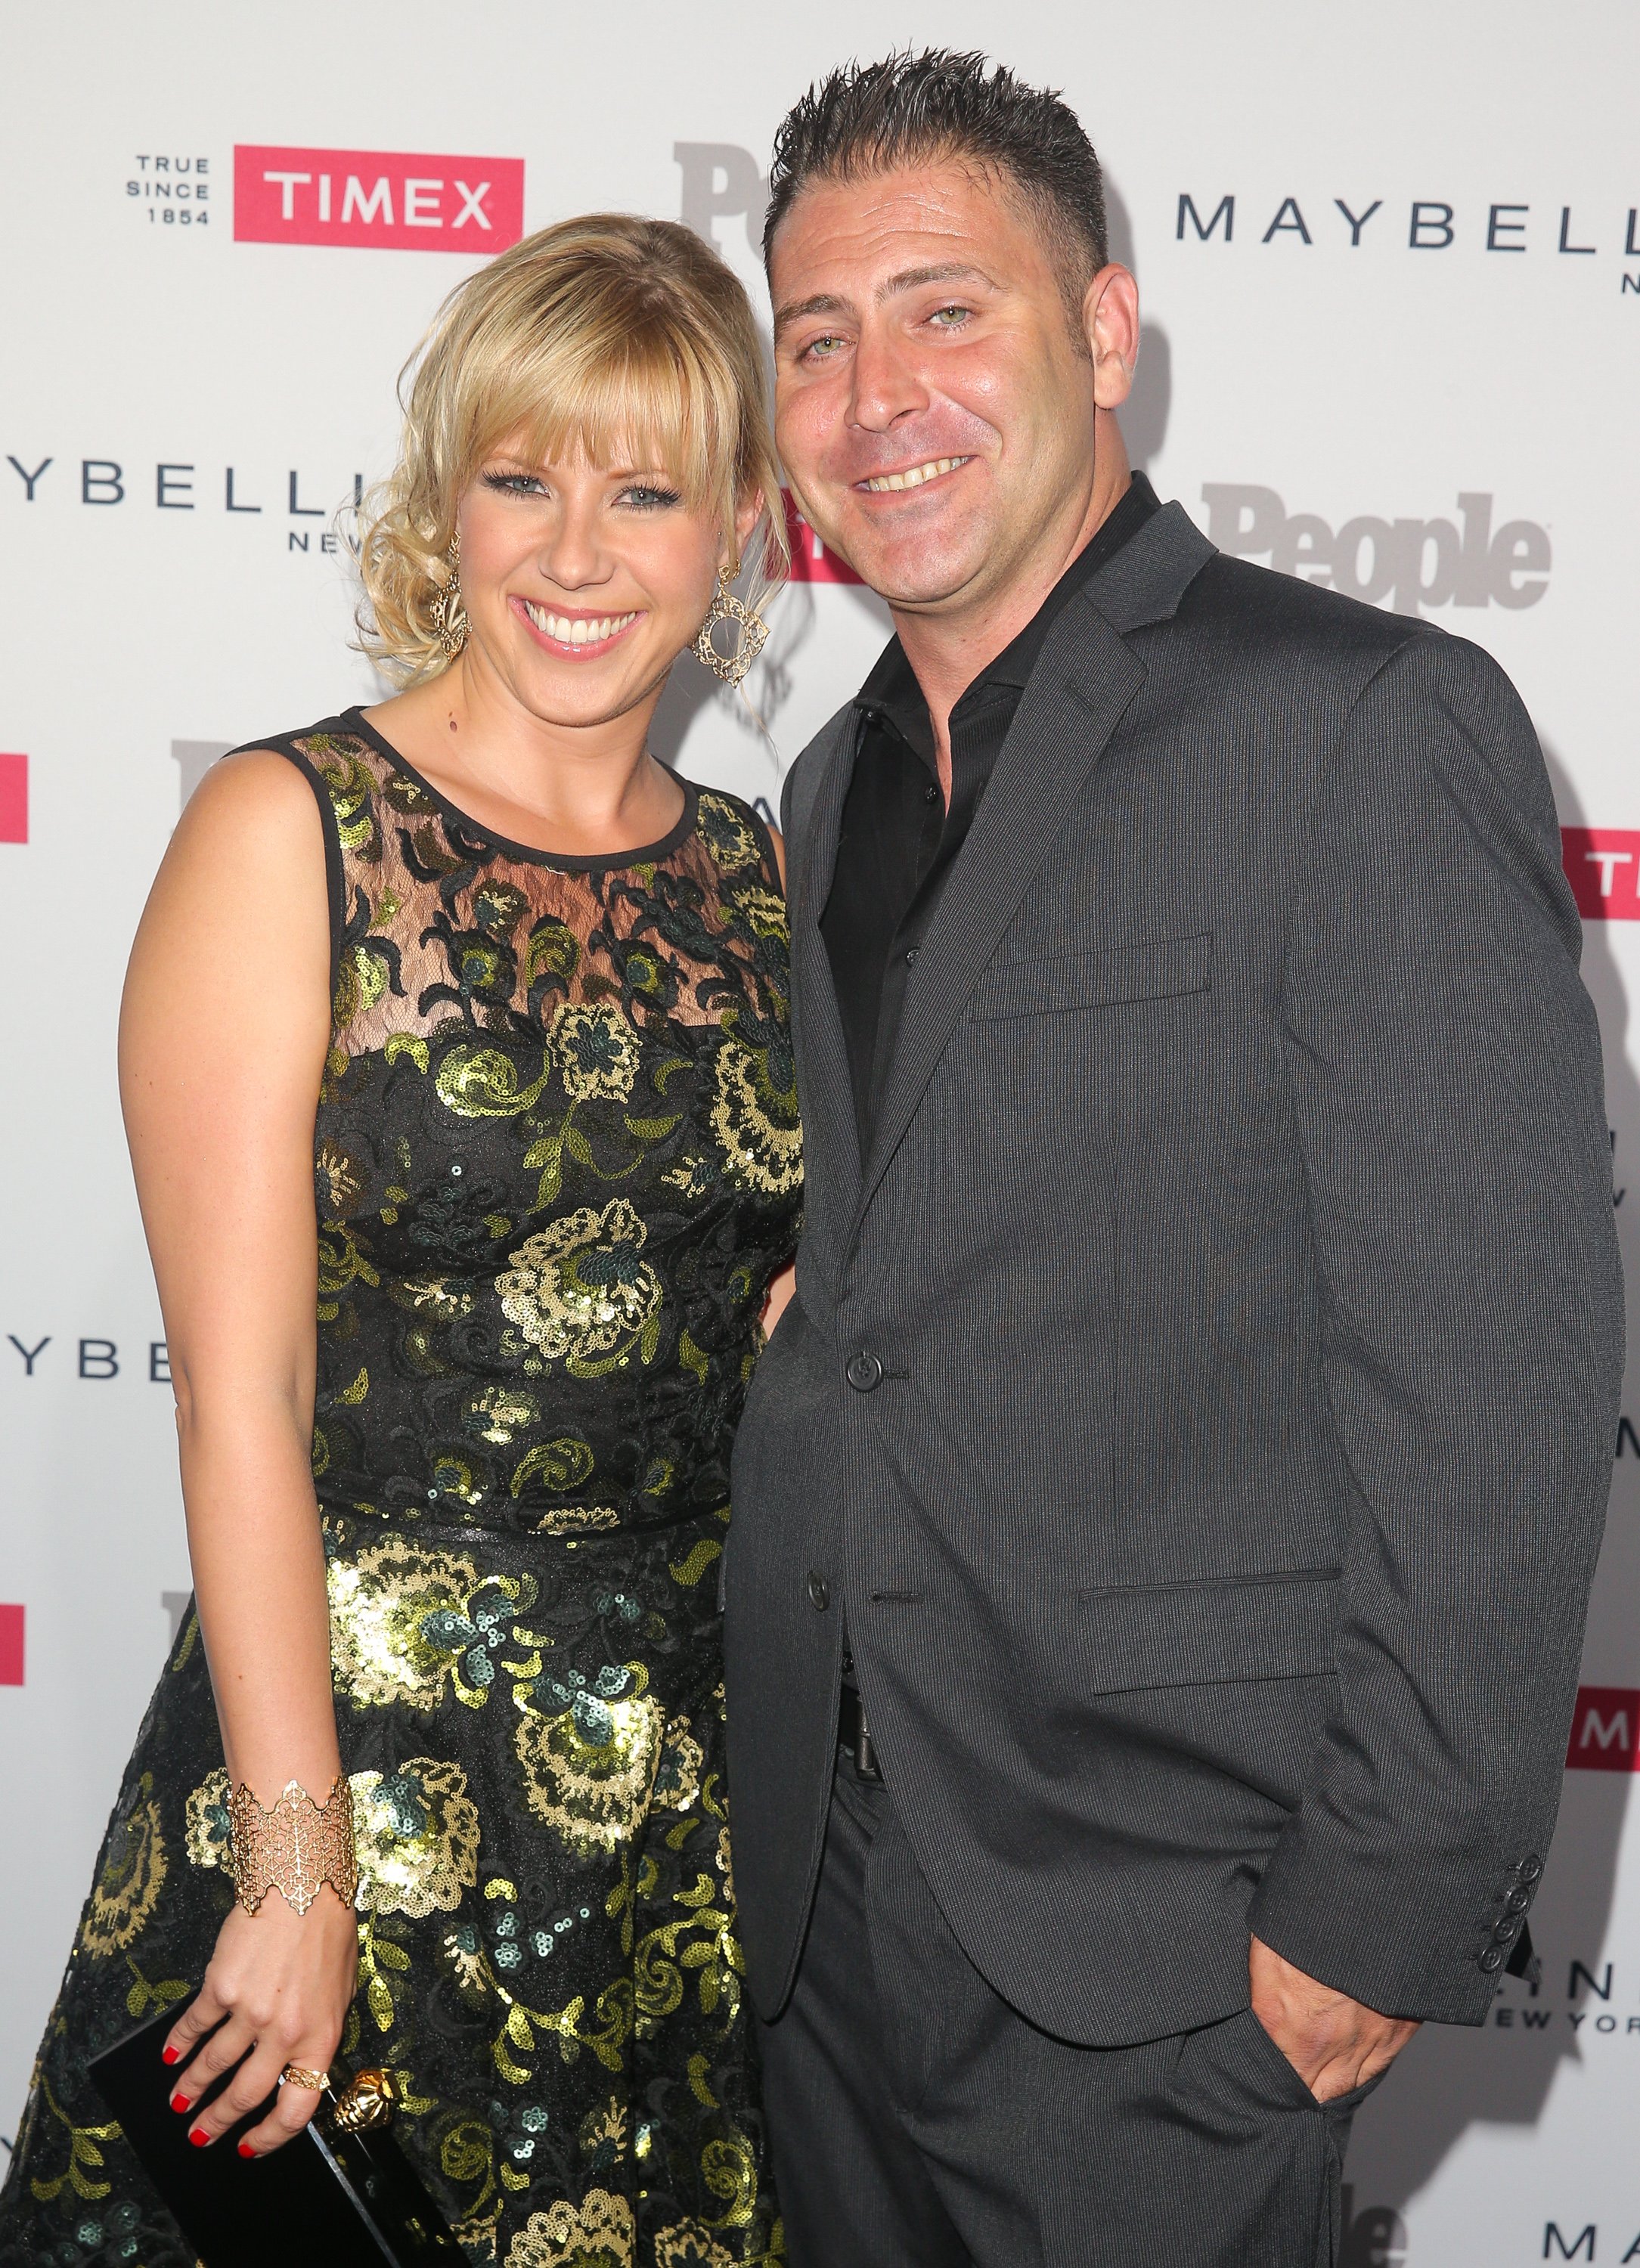 Who Is Jodie Sweetin Married To